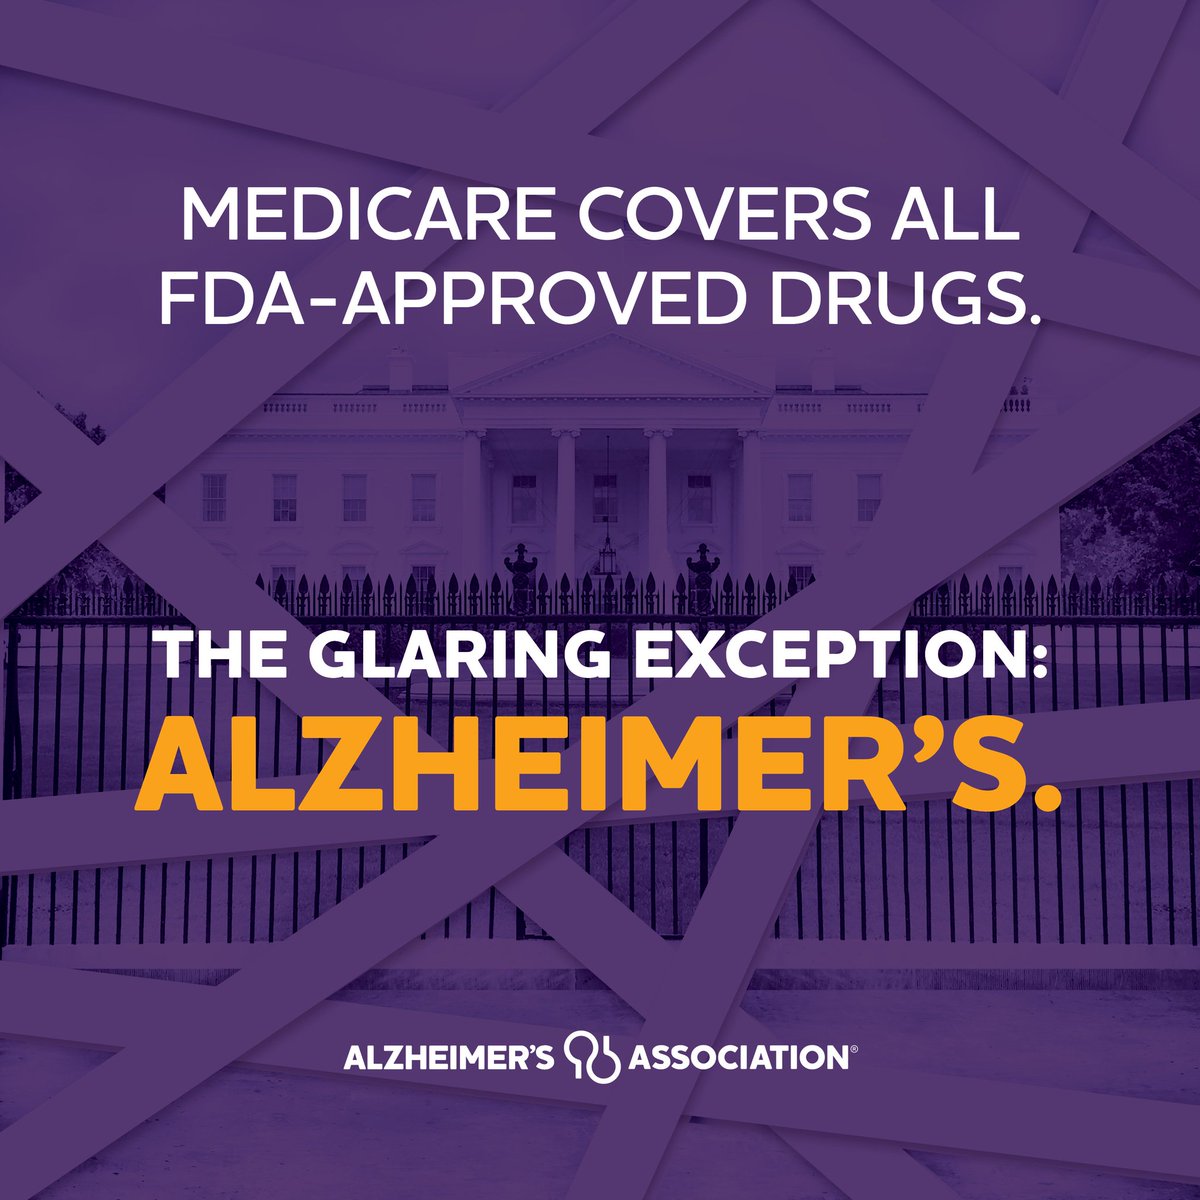 We continue to demand full, unrestricted coverage of FDA-approved Alz treatments. @RepRobinKelly please show your support by joining the bipartisan sign on letter to @CMSgov! #AccessNow #ENDALZ